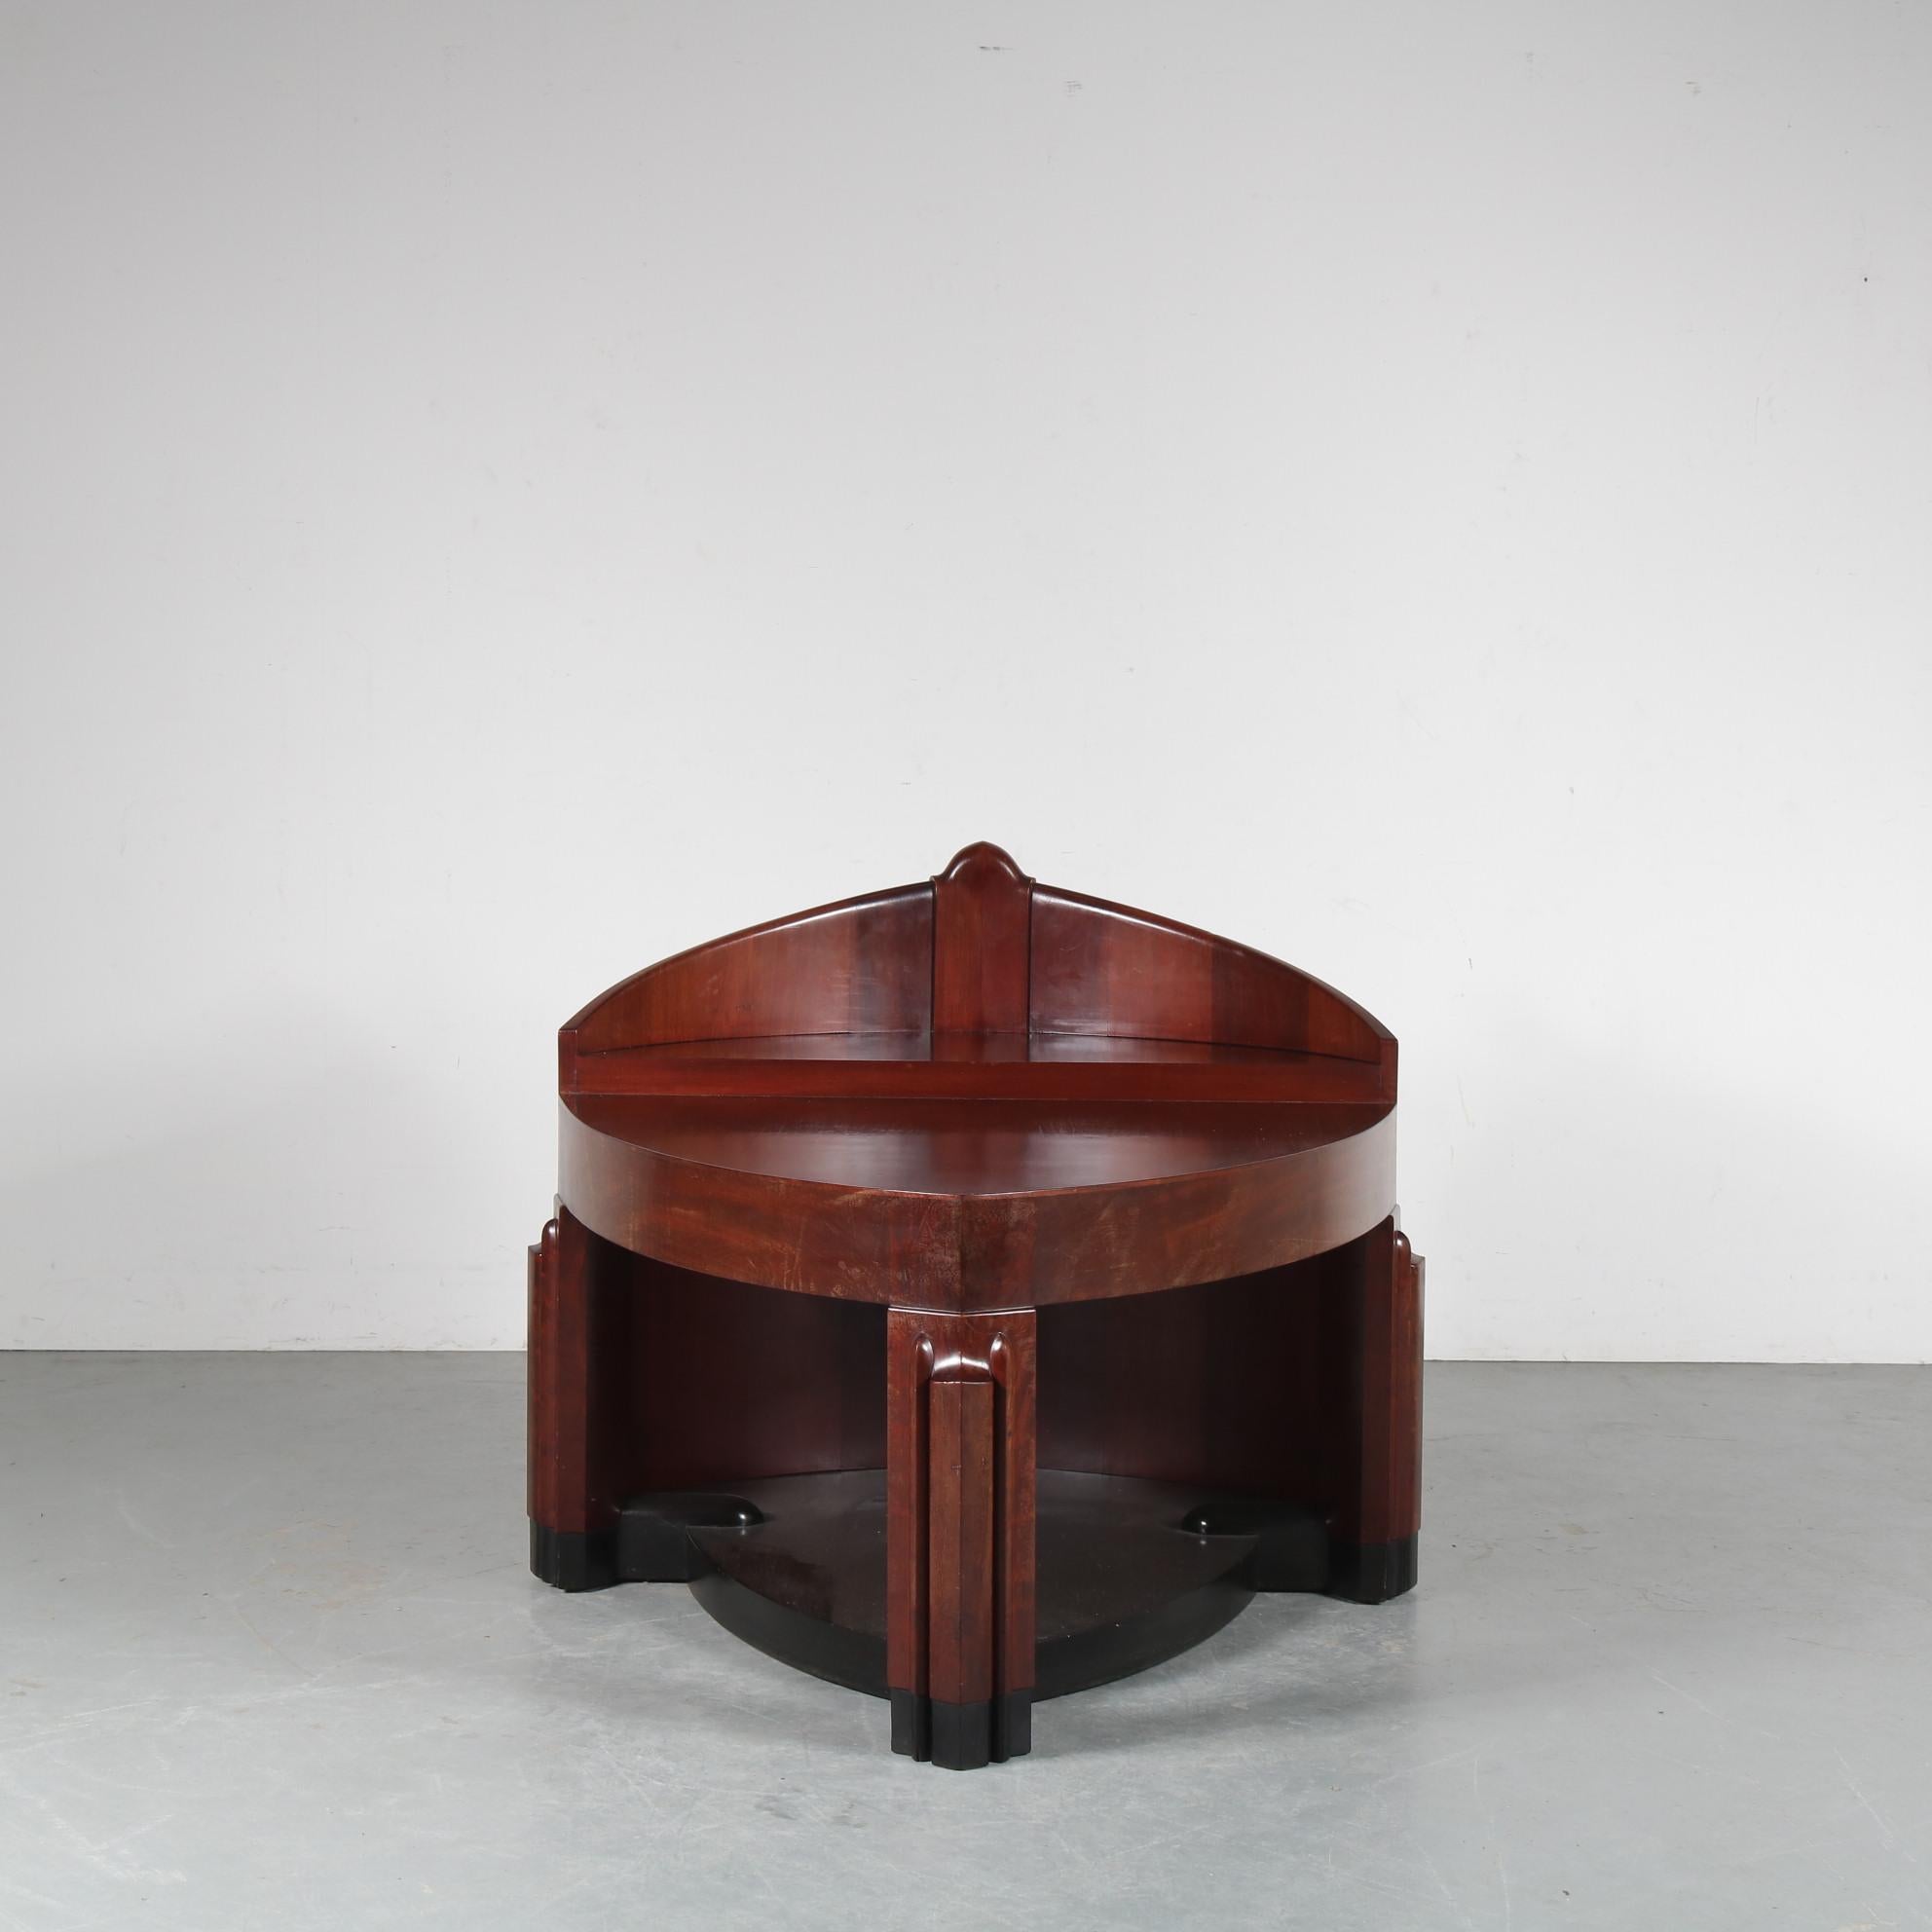 A unique hall table designed by Harry Dreesen for the “Exposition Arts Decratis et Industriels Modernes”. The International Exhibition of Modern Decorative and Industrial Arts was a World’s fair held in Paris, France, from April to October 1925.